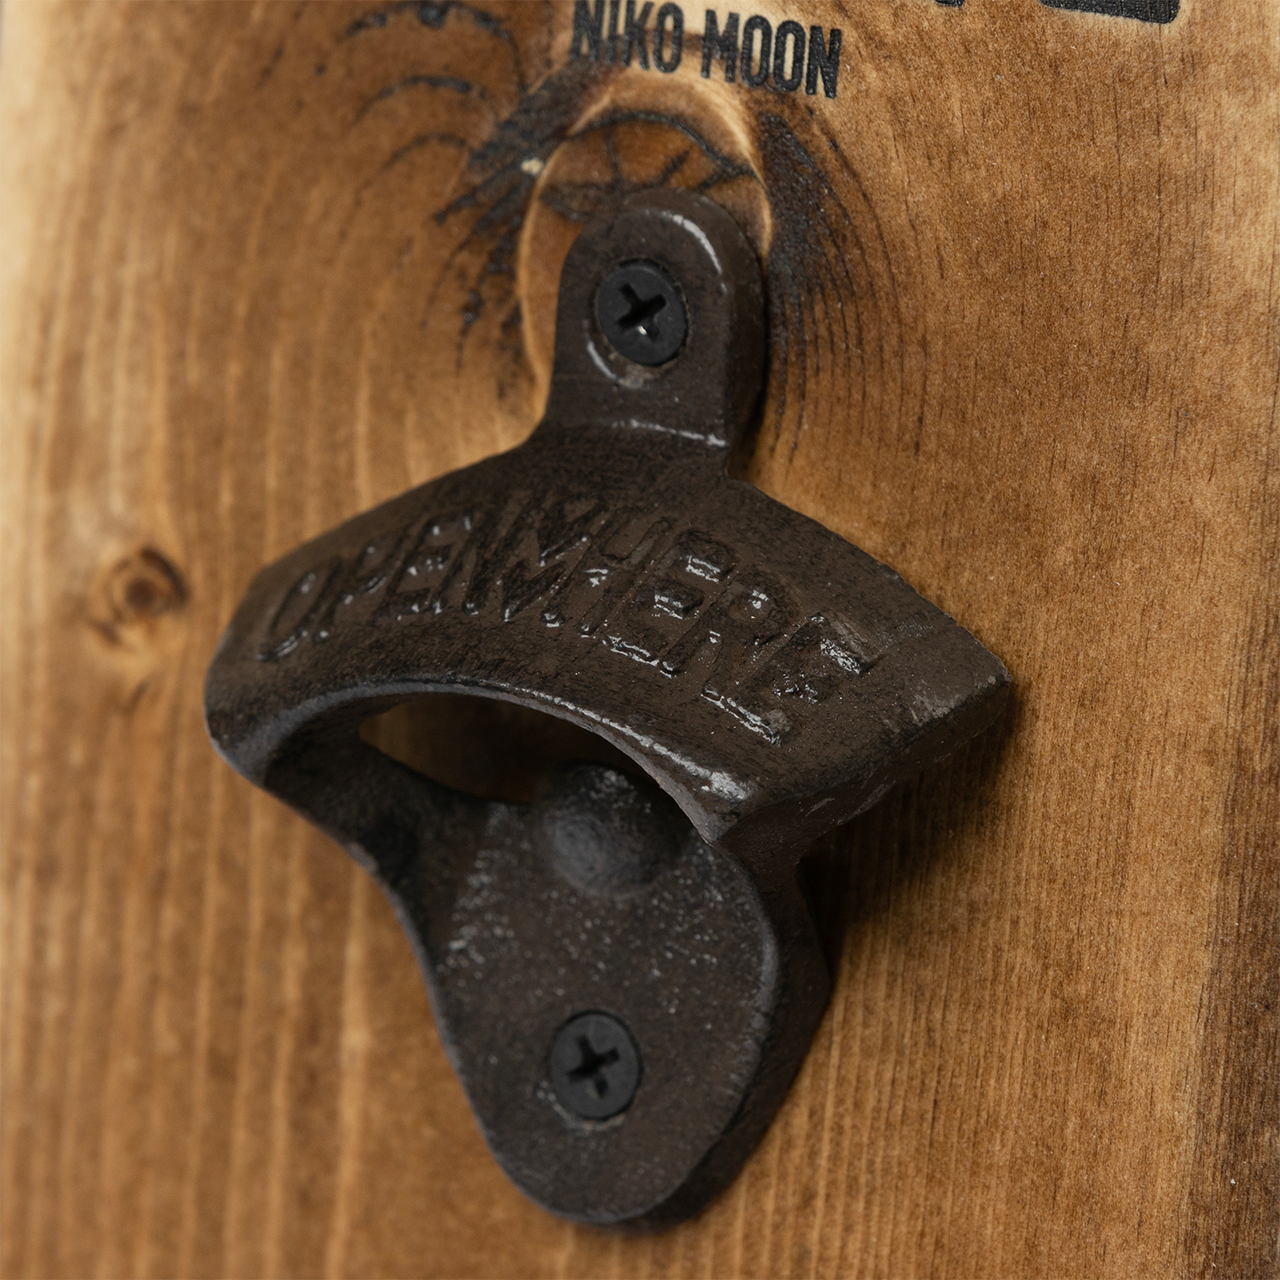 Good Times Only Wooden Bottle Opener Wall Mount